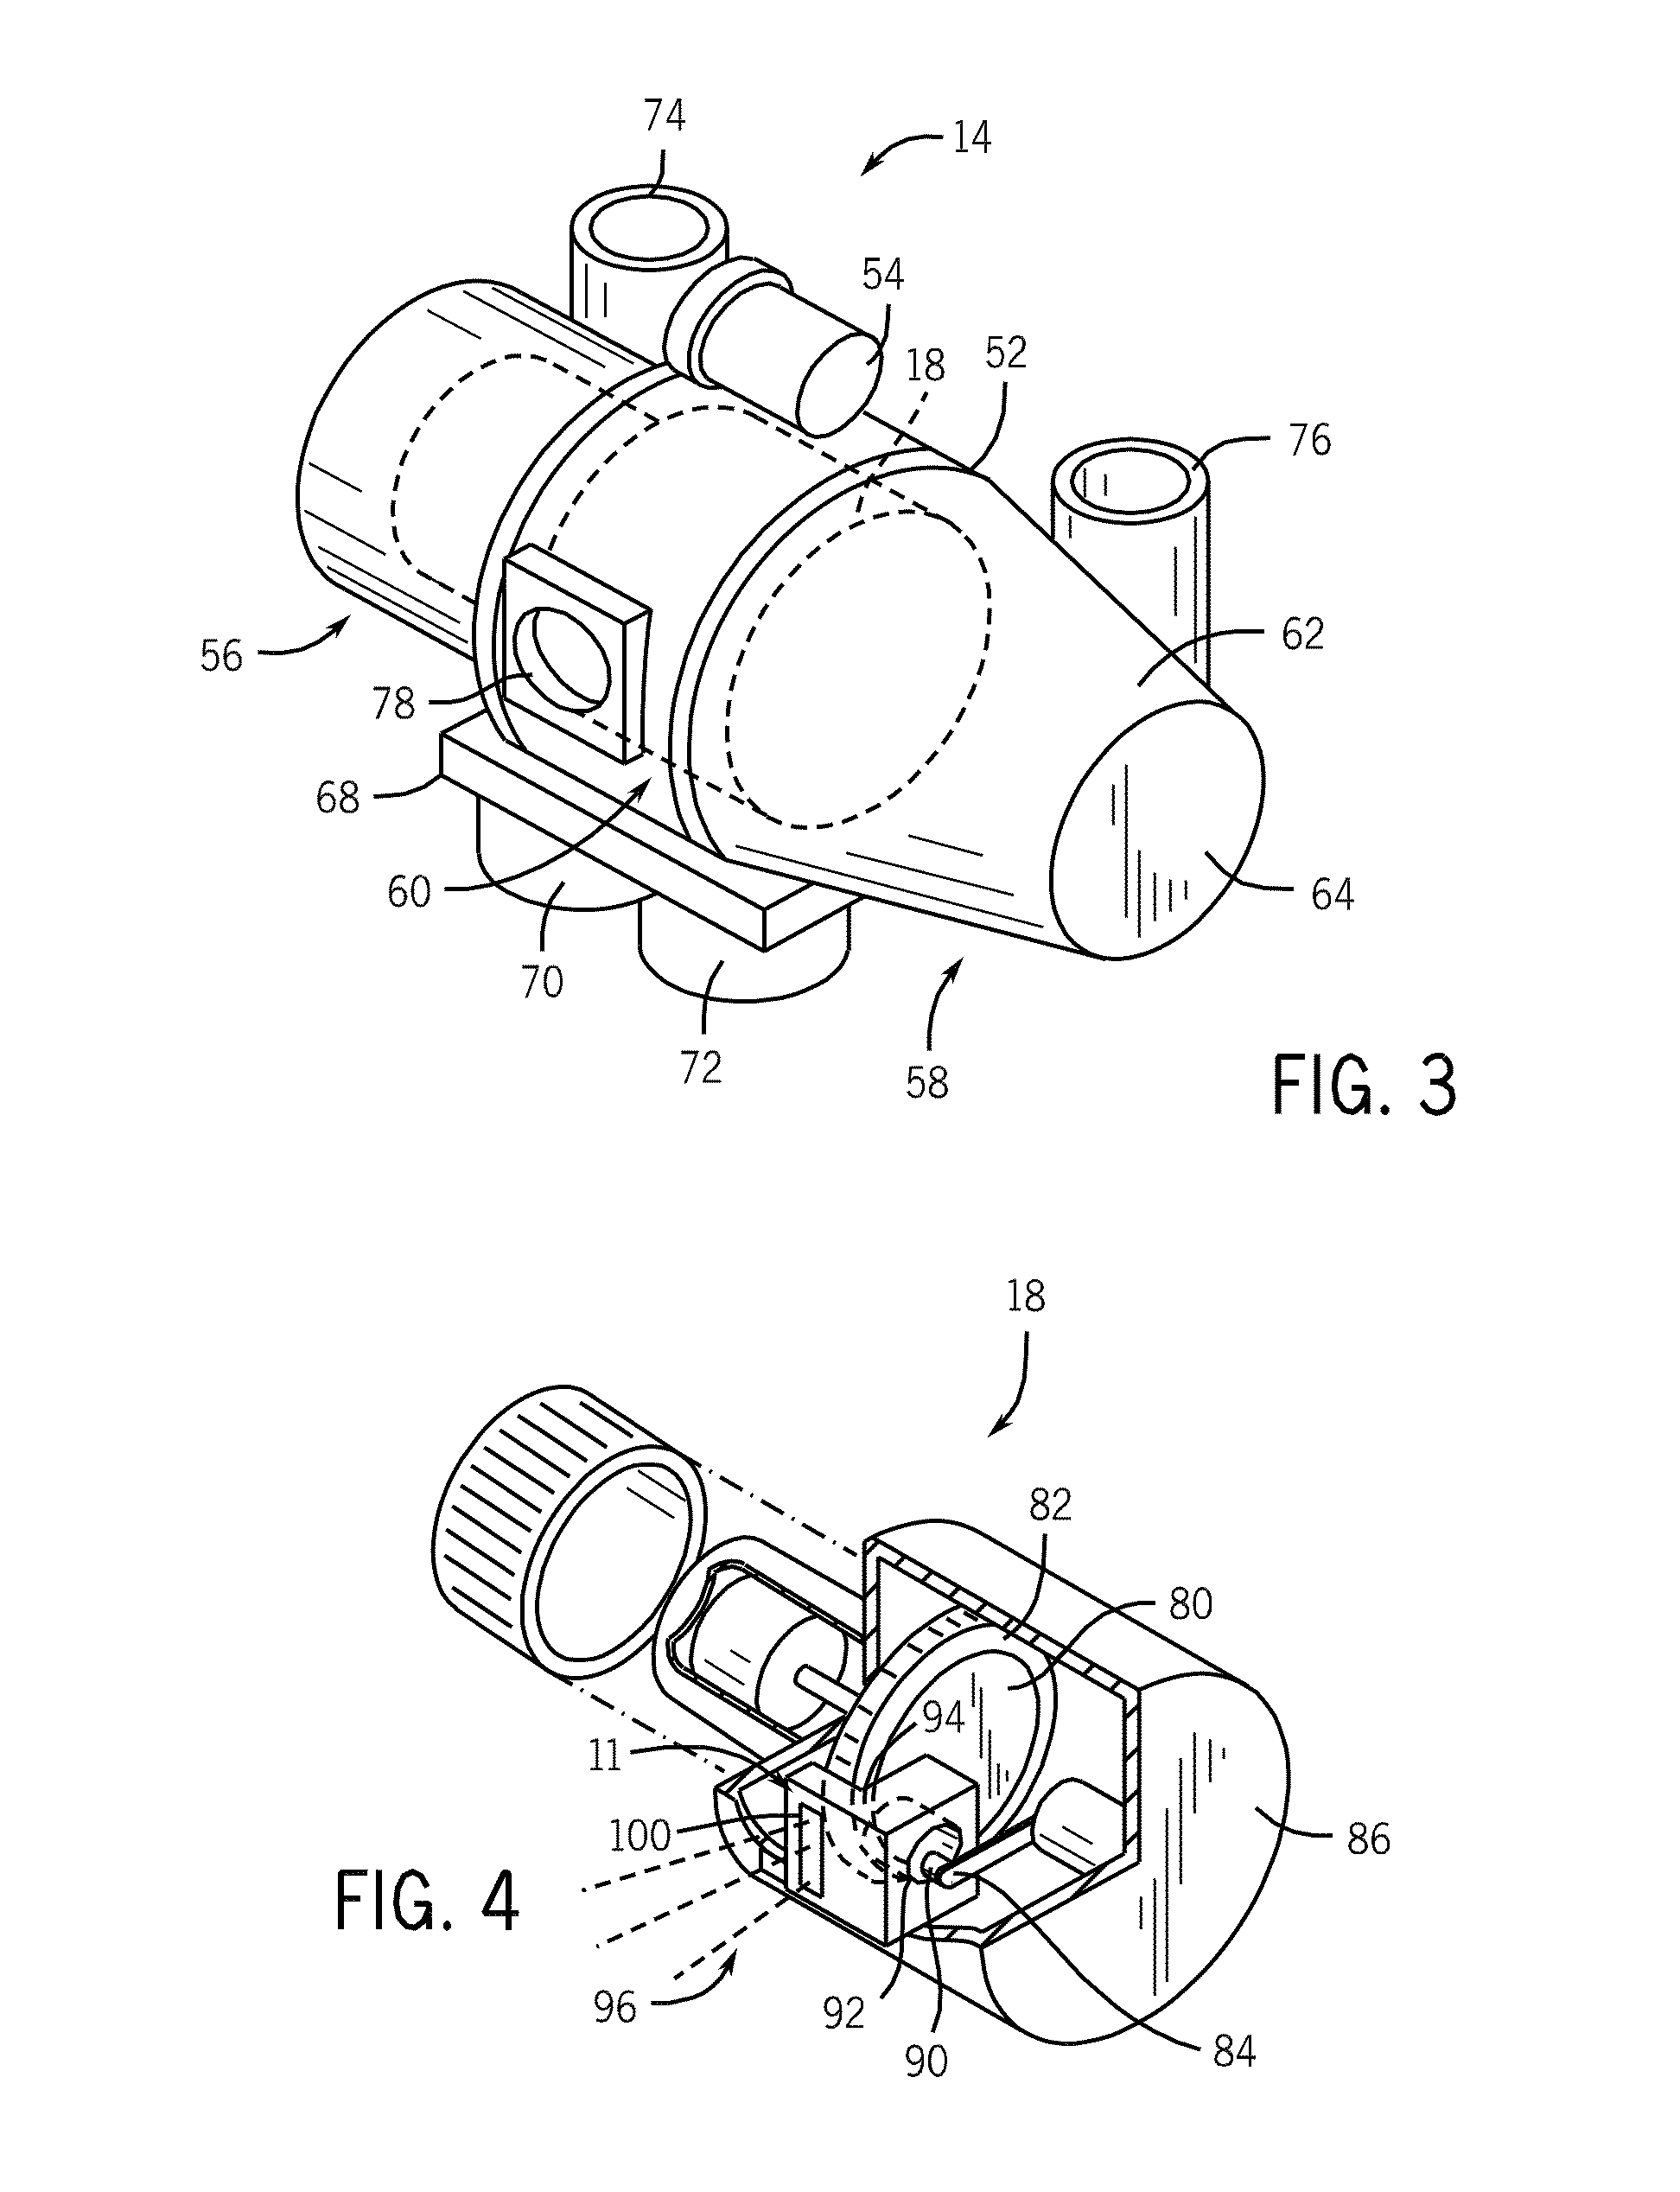 Thermal energy storage and transfer assembly and method of making same